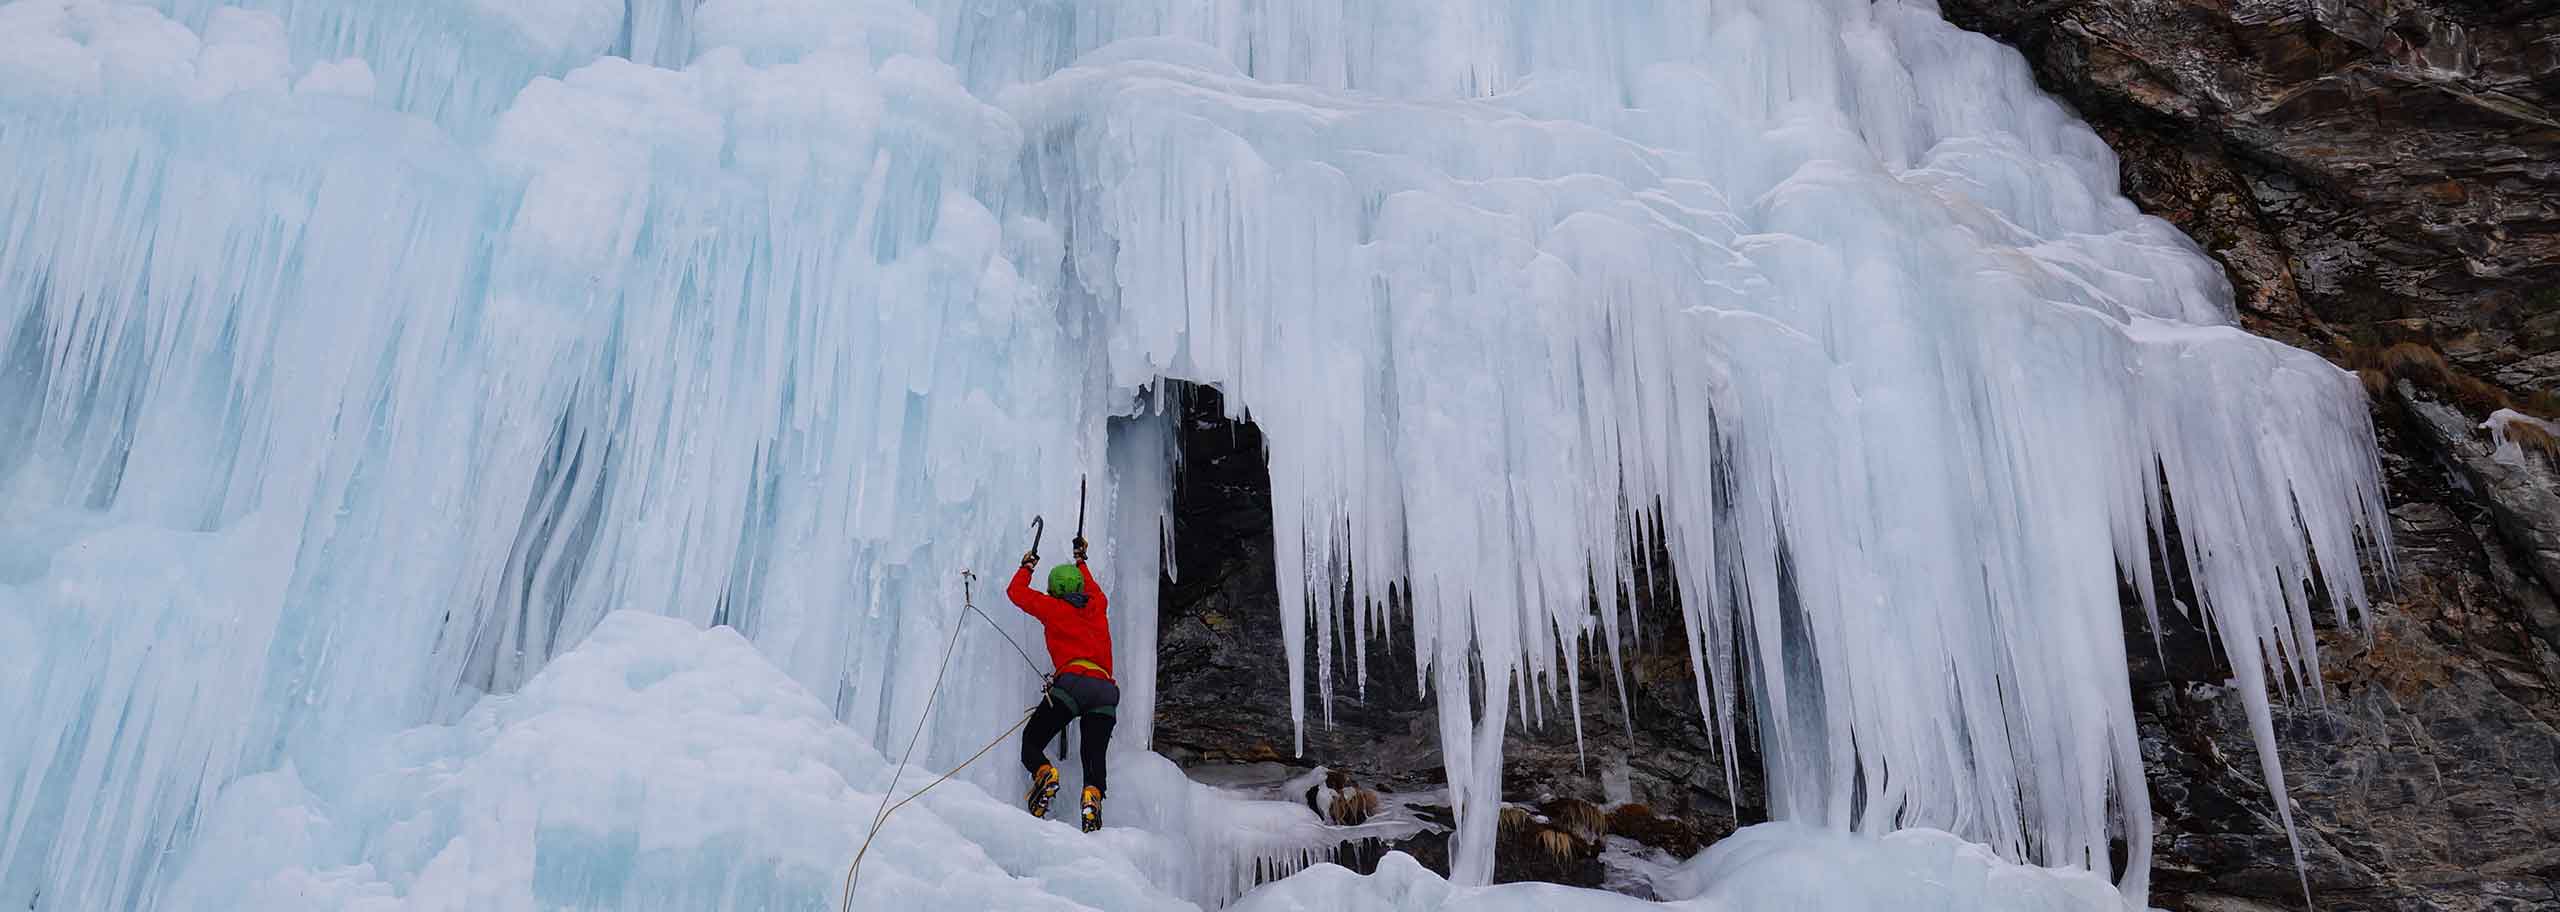 Ice Climbing in Alta Pusteria, Courses & Multi-pitch Routes